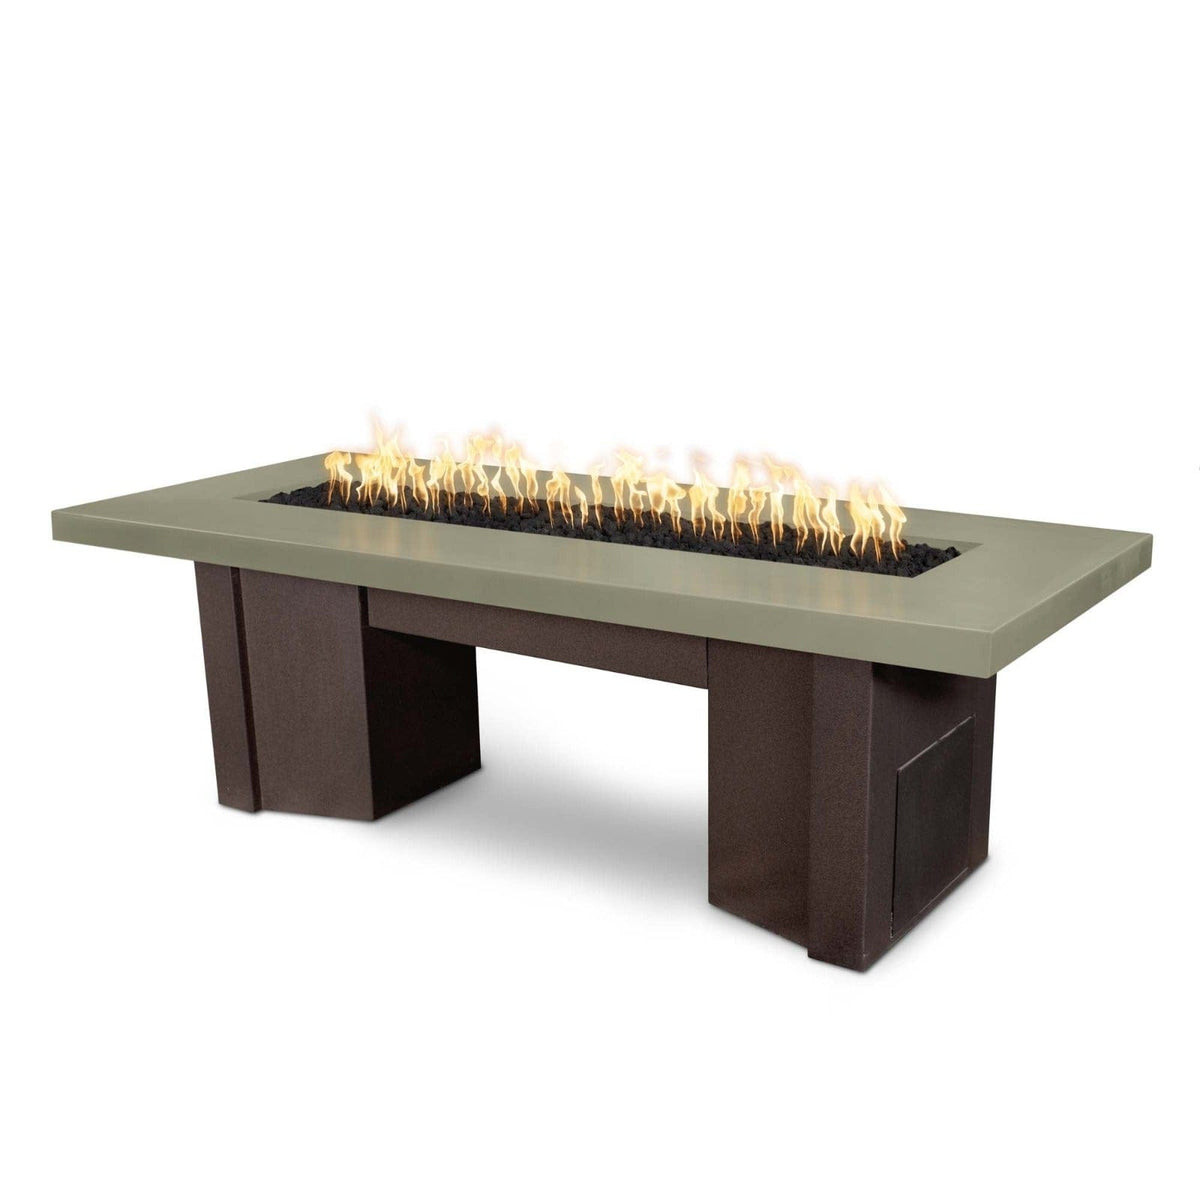 The Outdoor Plus Fire Features Ash (-ASH) / Java Powder Coated Steel (-JAV) The Outdoor Plus 60&quot; Alameda Fire Table Smooth Concrete in Liquid Propane - Match Lit with Flame Sense System / OPT-ALMGFRC60FSML-LP